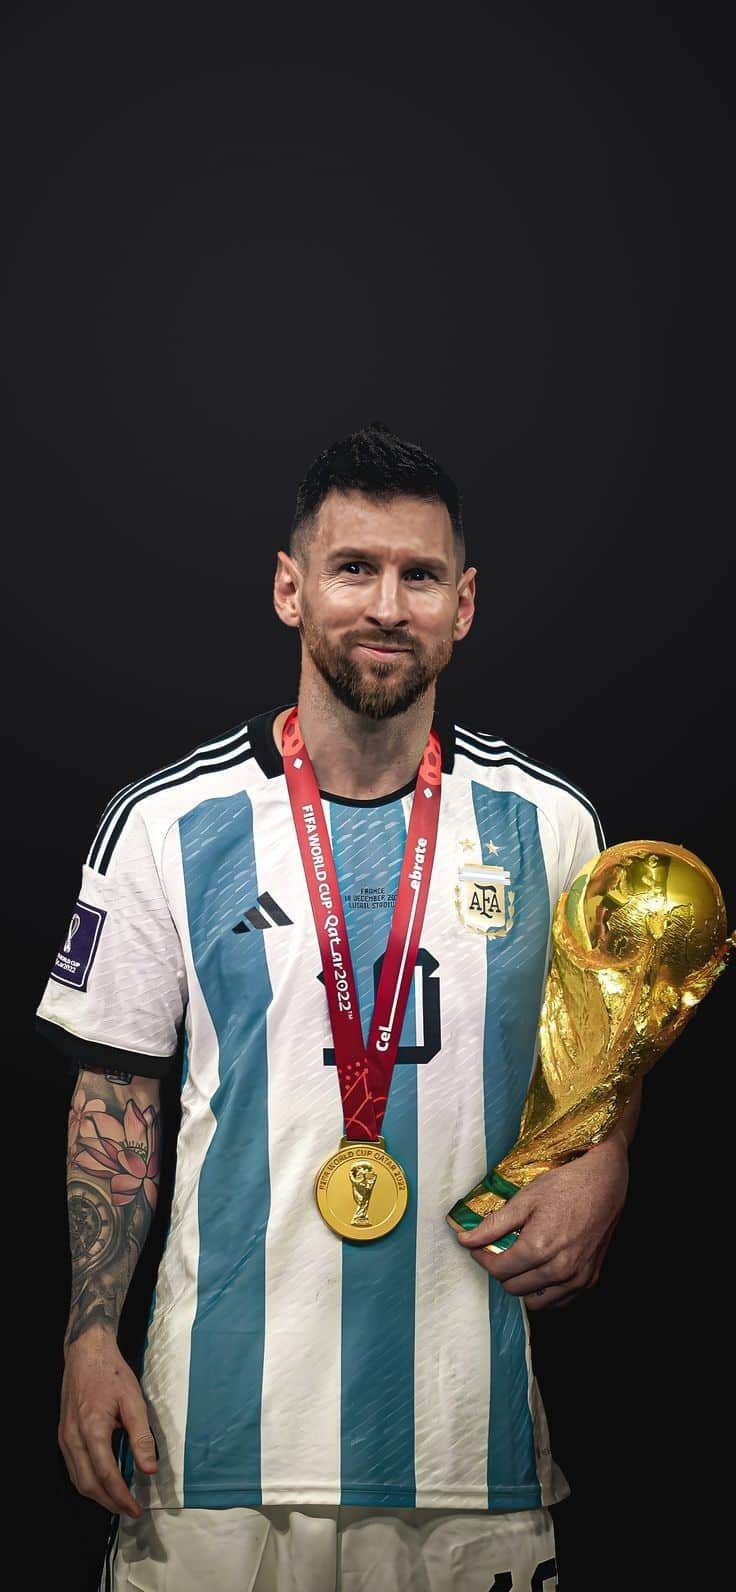 Lionel messi Messi king 👑🤯
Watch the beat moment 🤯🔥🎥|Pinterest